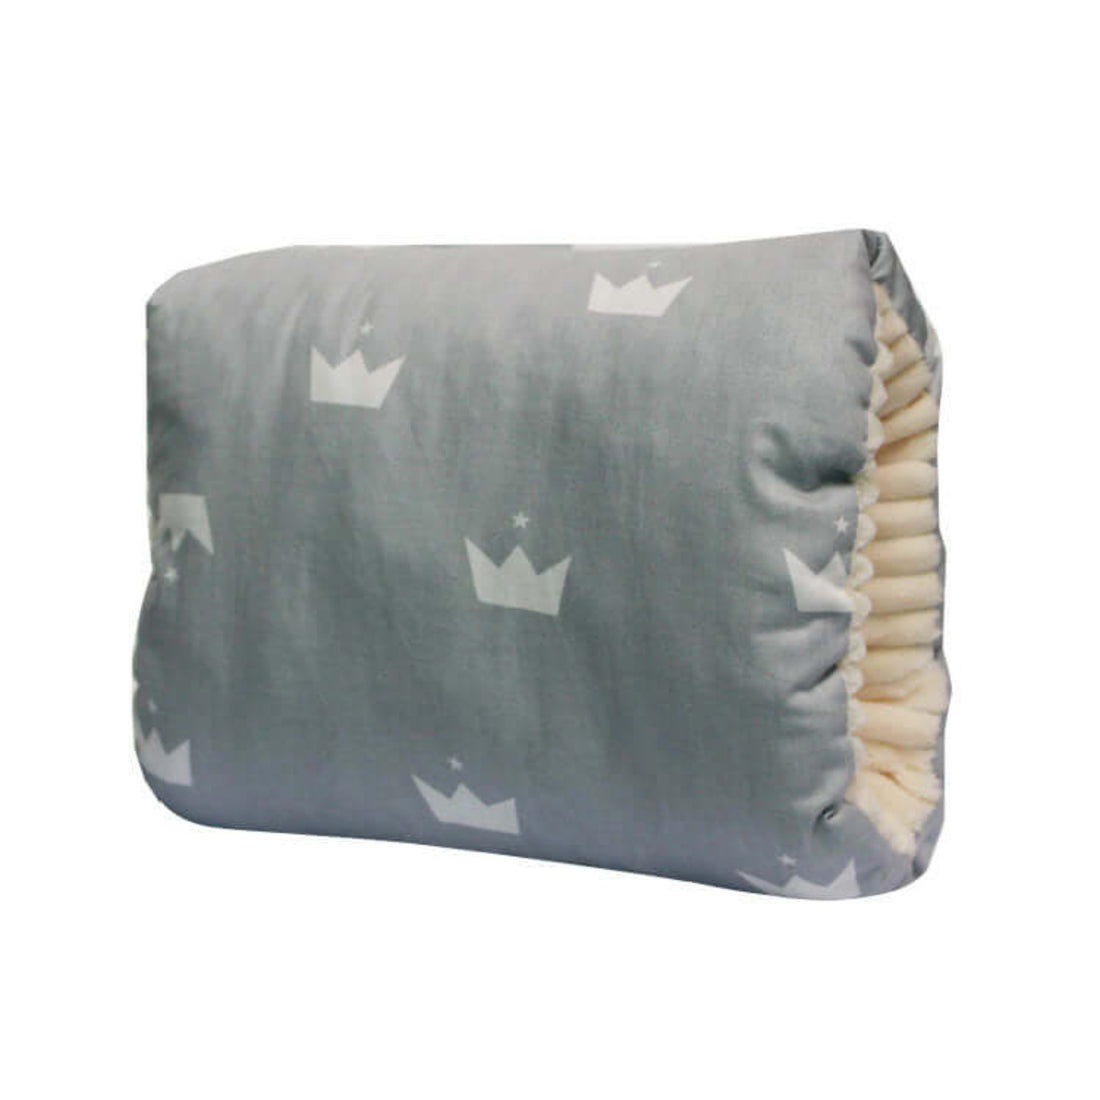 Breastfeeding arm support pillow